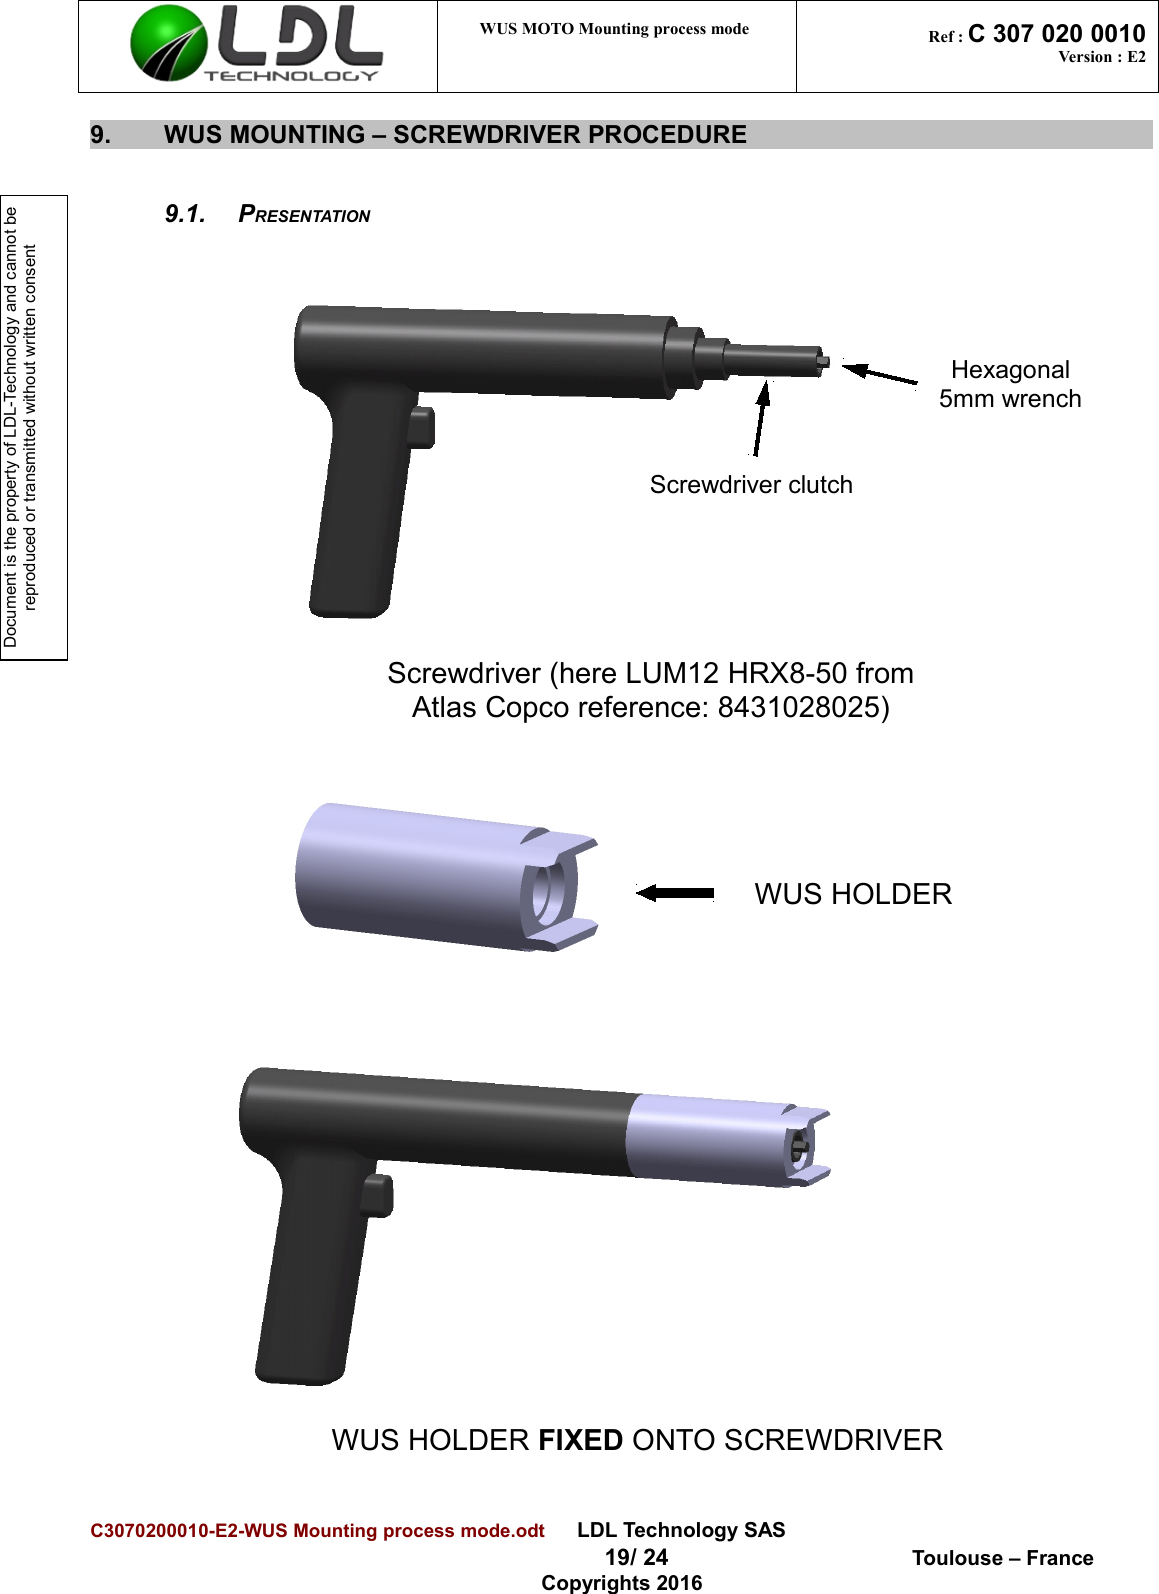 Document is the property of LDL-Technology and cannot be reproduced or transmitted without written consent WUS MOTO Mounting process mode  Ref : C 307 020 0010Version : E29. WUS MOUNTING – SCREWDRIVER PROCEDURE9.1. PRESENTATIONC3070200010-E2-WUS Mounting process mode.odt      LDL Technology SAS  19/ 24  Toulouse – FranceCopyrights 2016WUS HOLDERWUS HOLDER FIXED ONTO SCREWDRIVERScrewdriver (here LUM12 HRX8-50 from Atlas Copco reference: 8431028025)Screwdriver clutchHexagonal5mm wrench